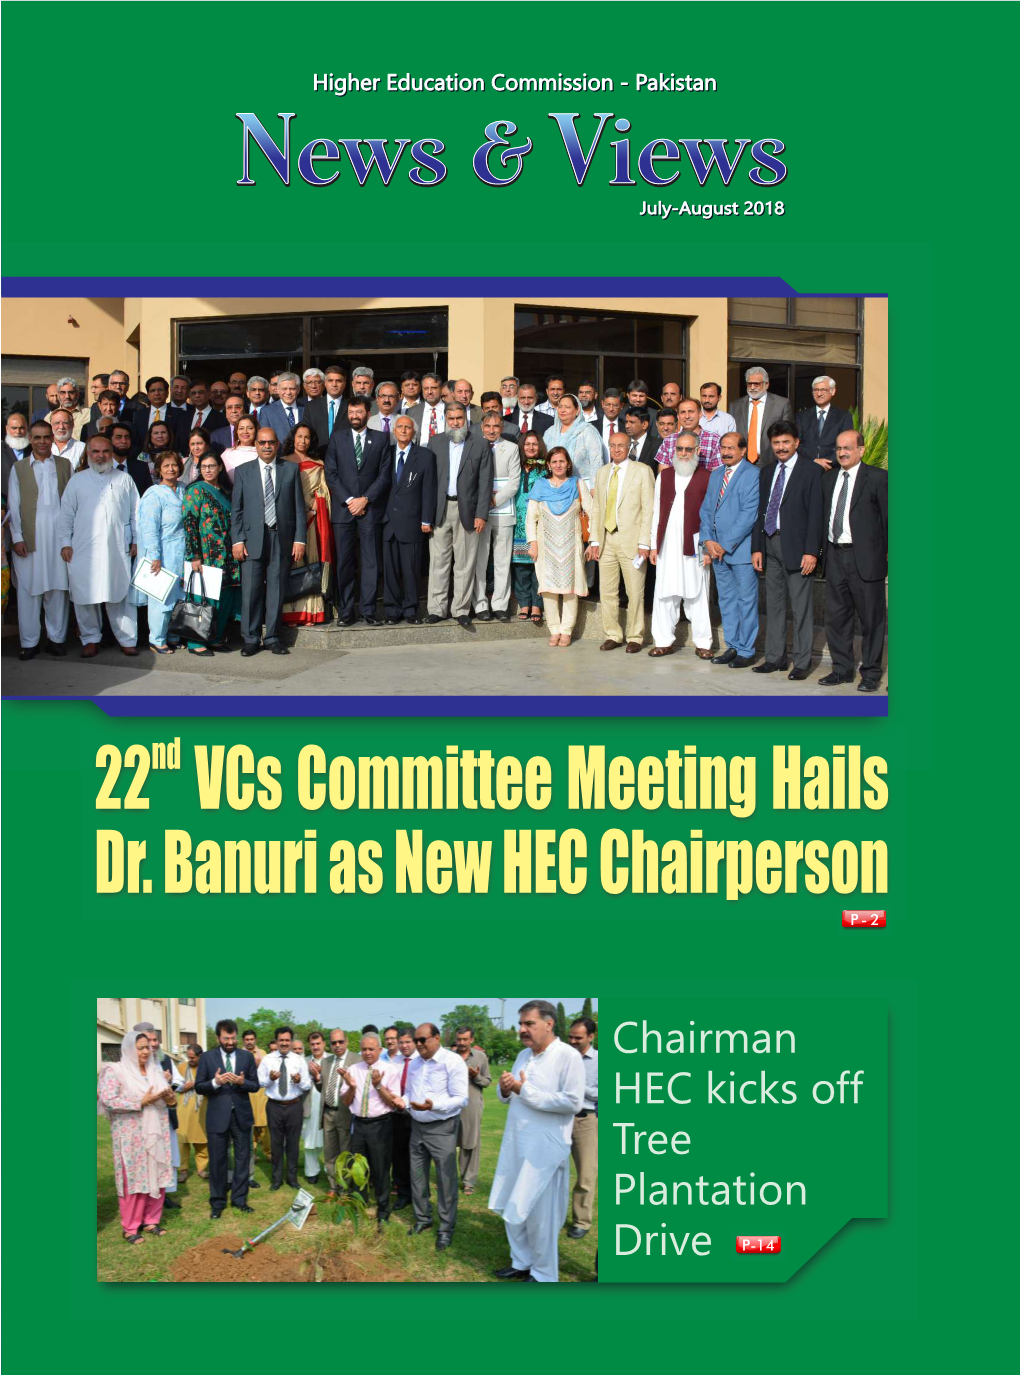 22 Vcs Committee Meeting Hails Dr. Banuri As New HEC Chairperson